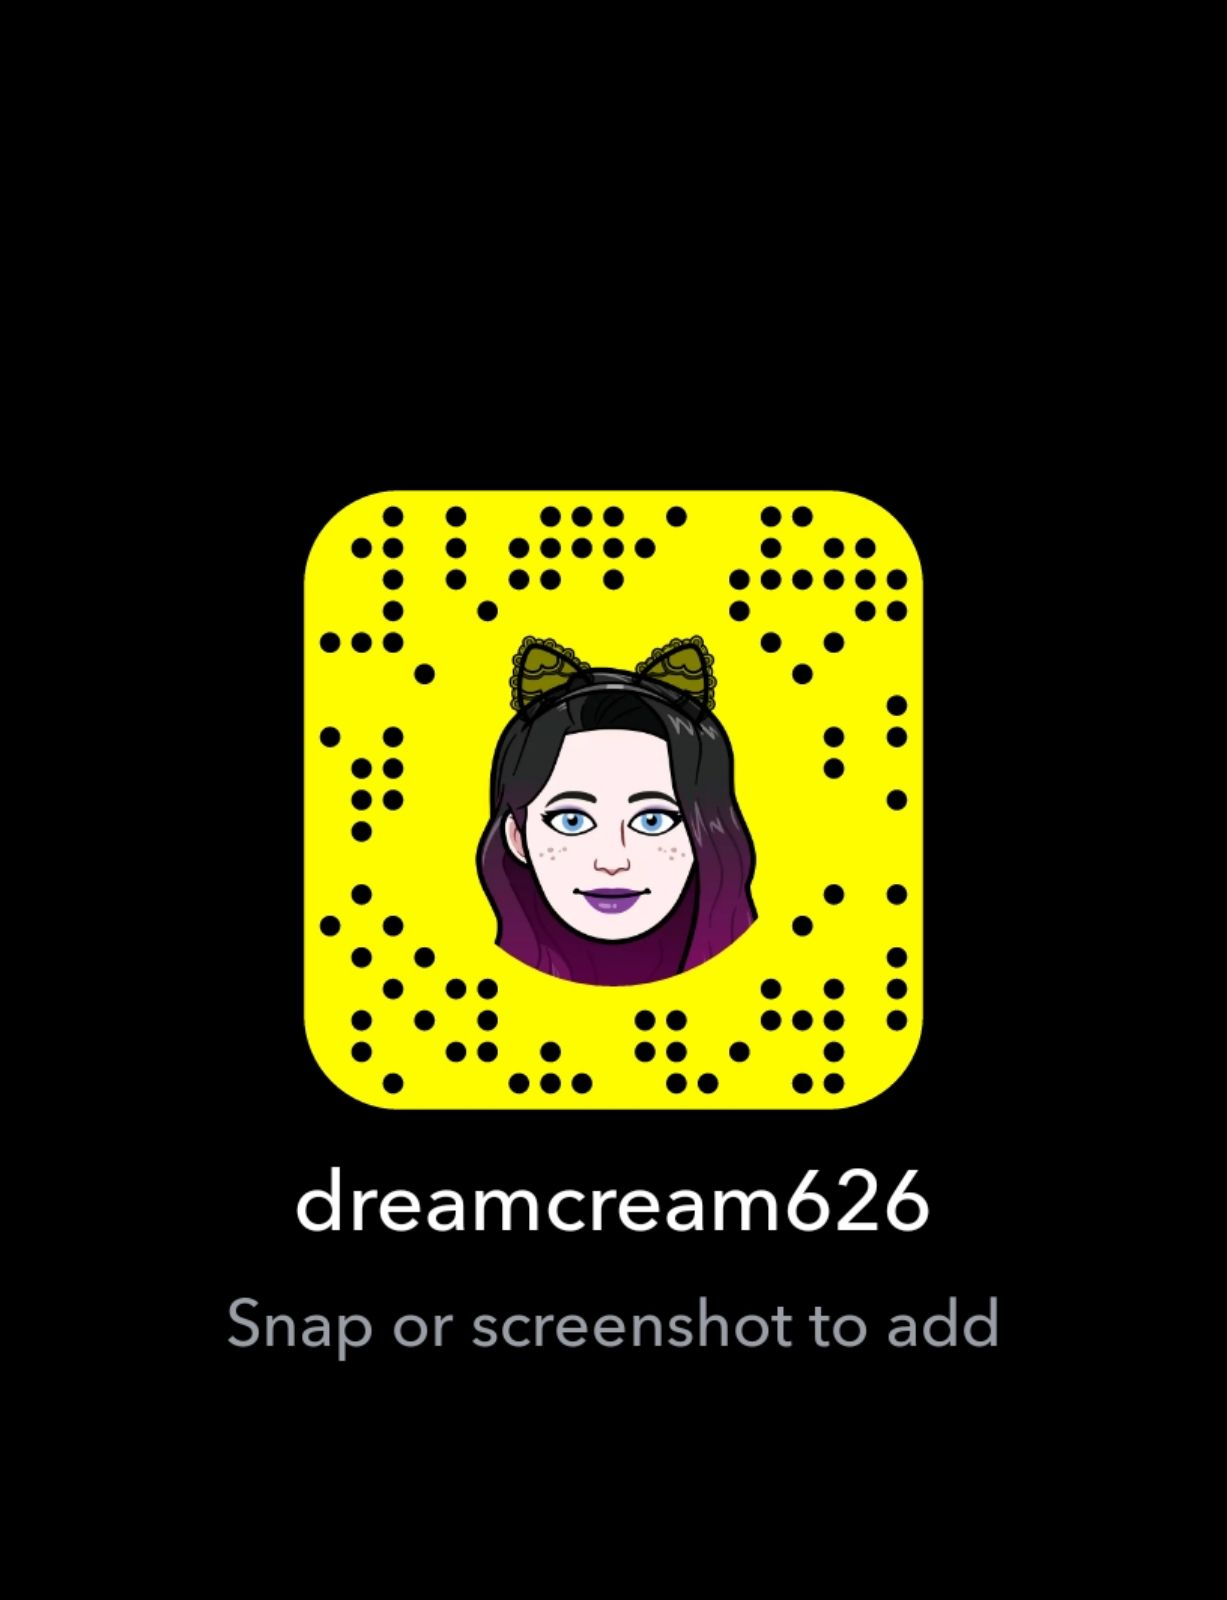 Photo by Dreamcream626 with the username @Dreamcream626, who is a star user,  February 27, 2020 at 9:27 AM and the text says 'Just love to have fun follow me on snapchat@Dreamcream626 #girls #video #videos #girl #women #freeporn #nsfw #movies #adult #teens #movie #star #pics #pictures

#porn #sex #memes #meme #love #gay #sexy #dank #funny #dankmemes #follow #instagram #like..'